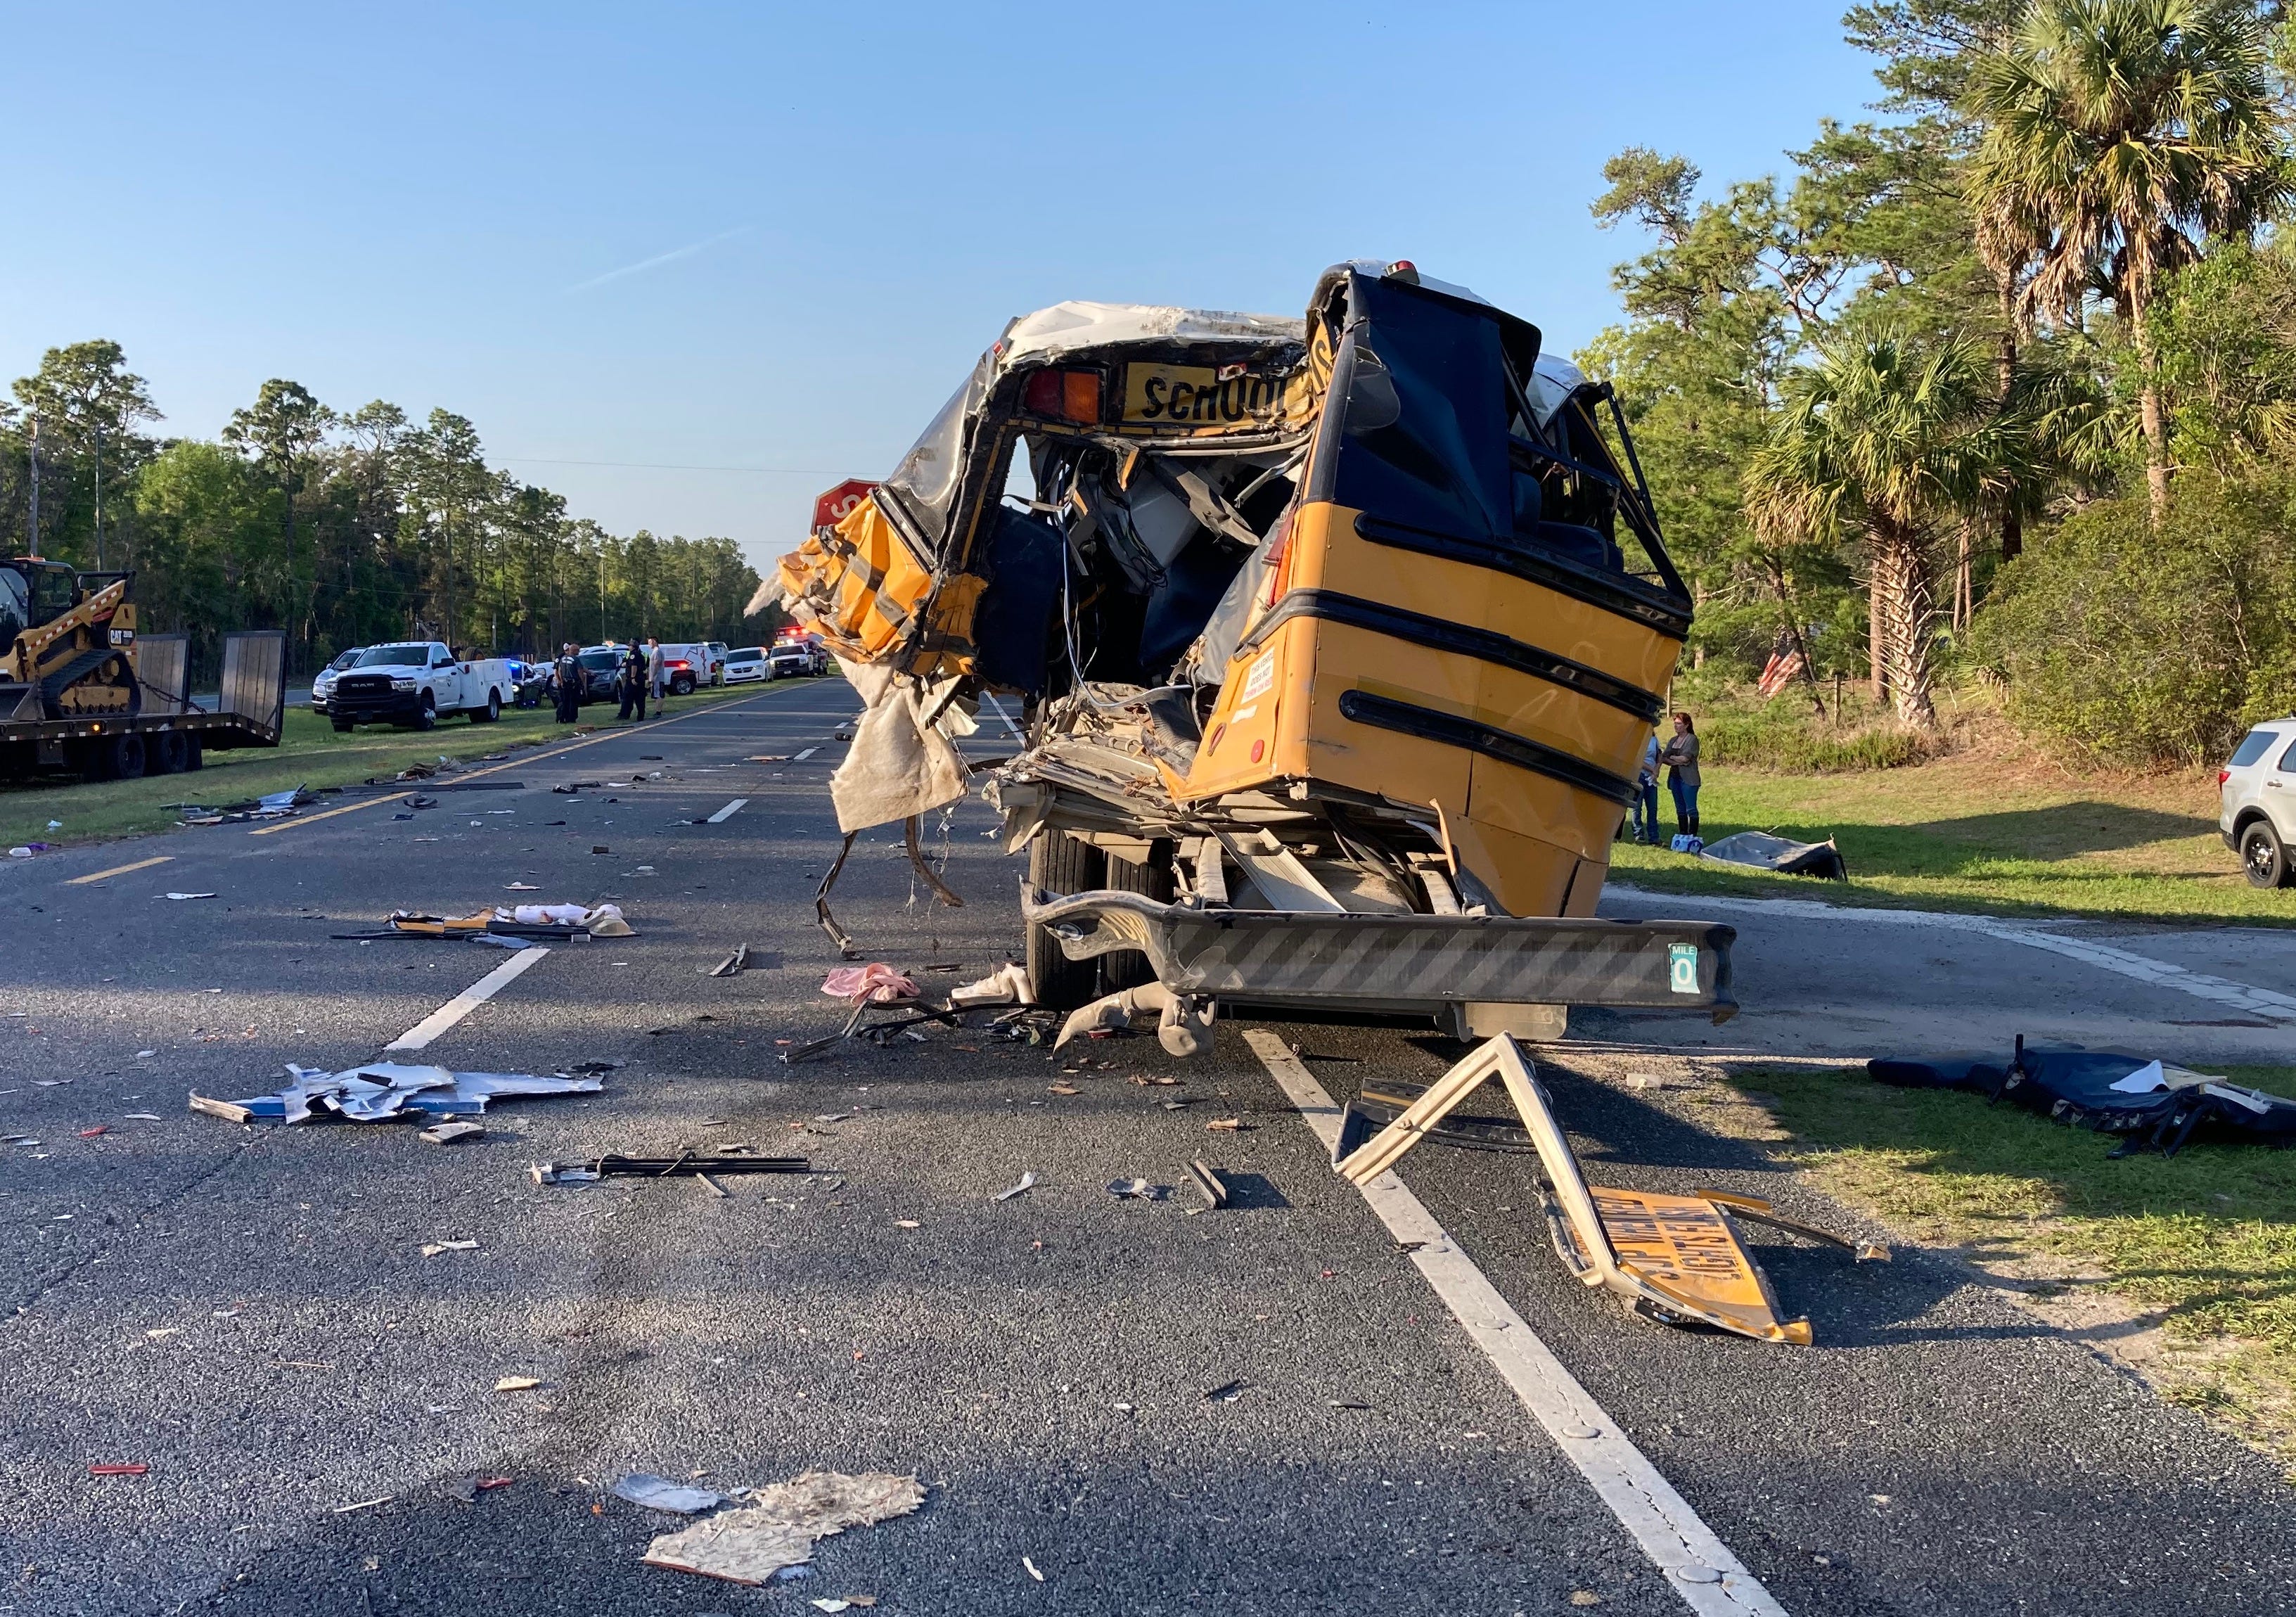 Levy County bus accident: Man charged in crash that injured 5 students